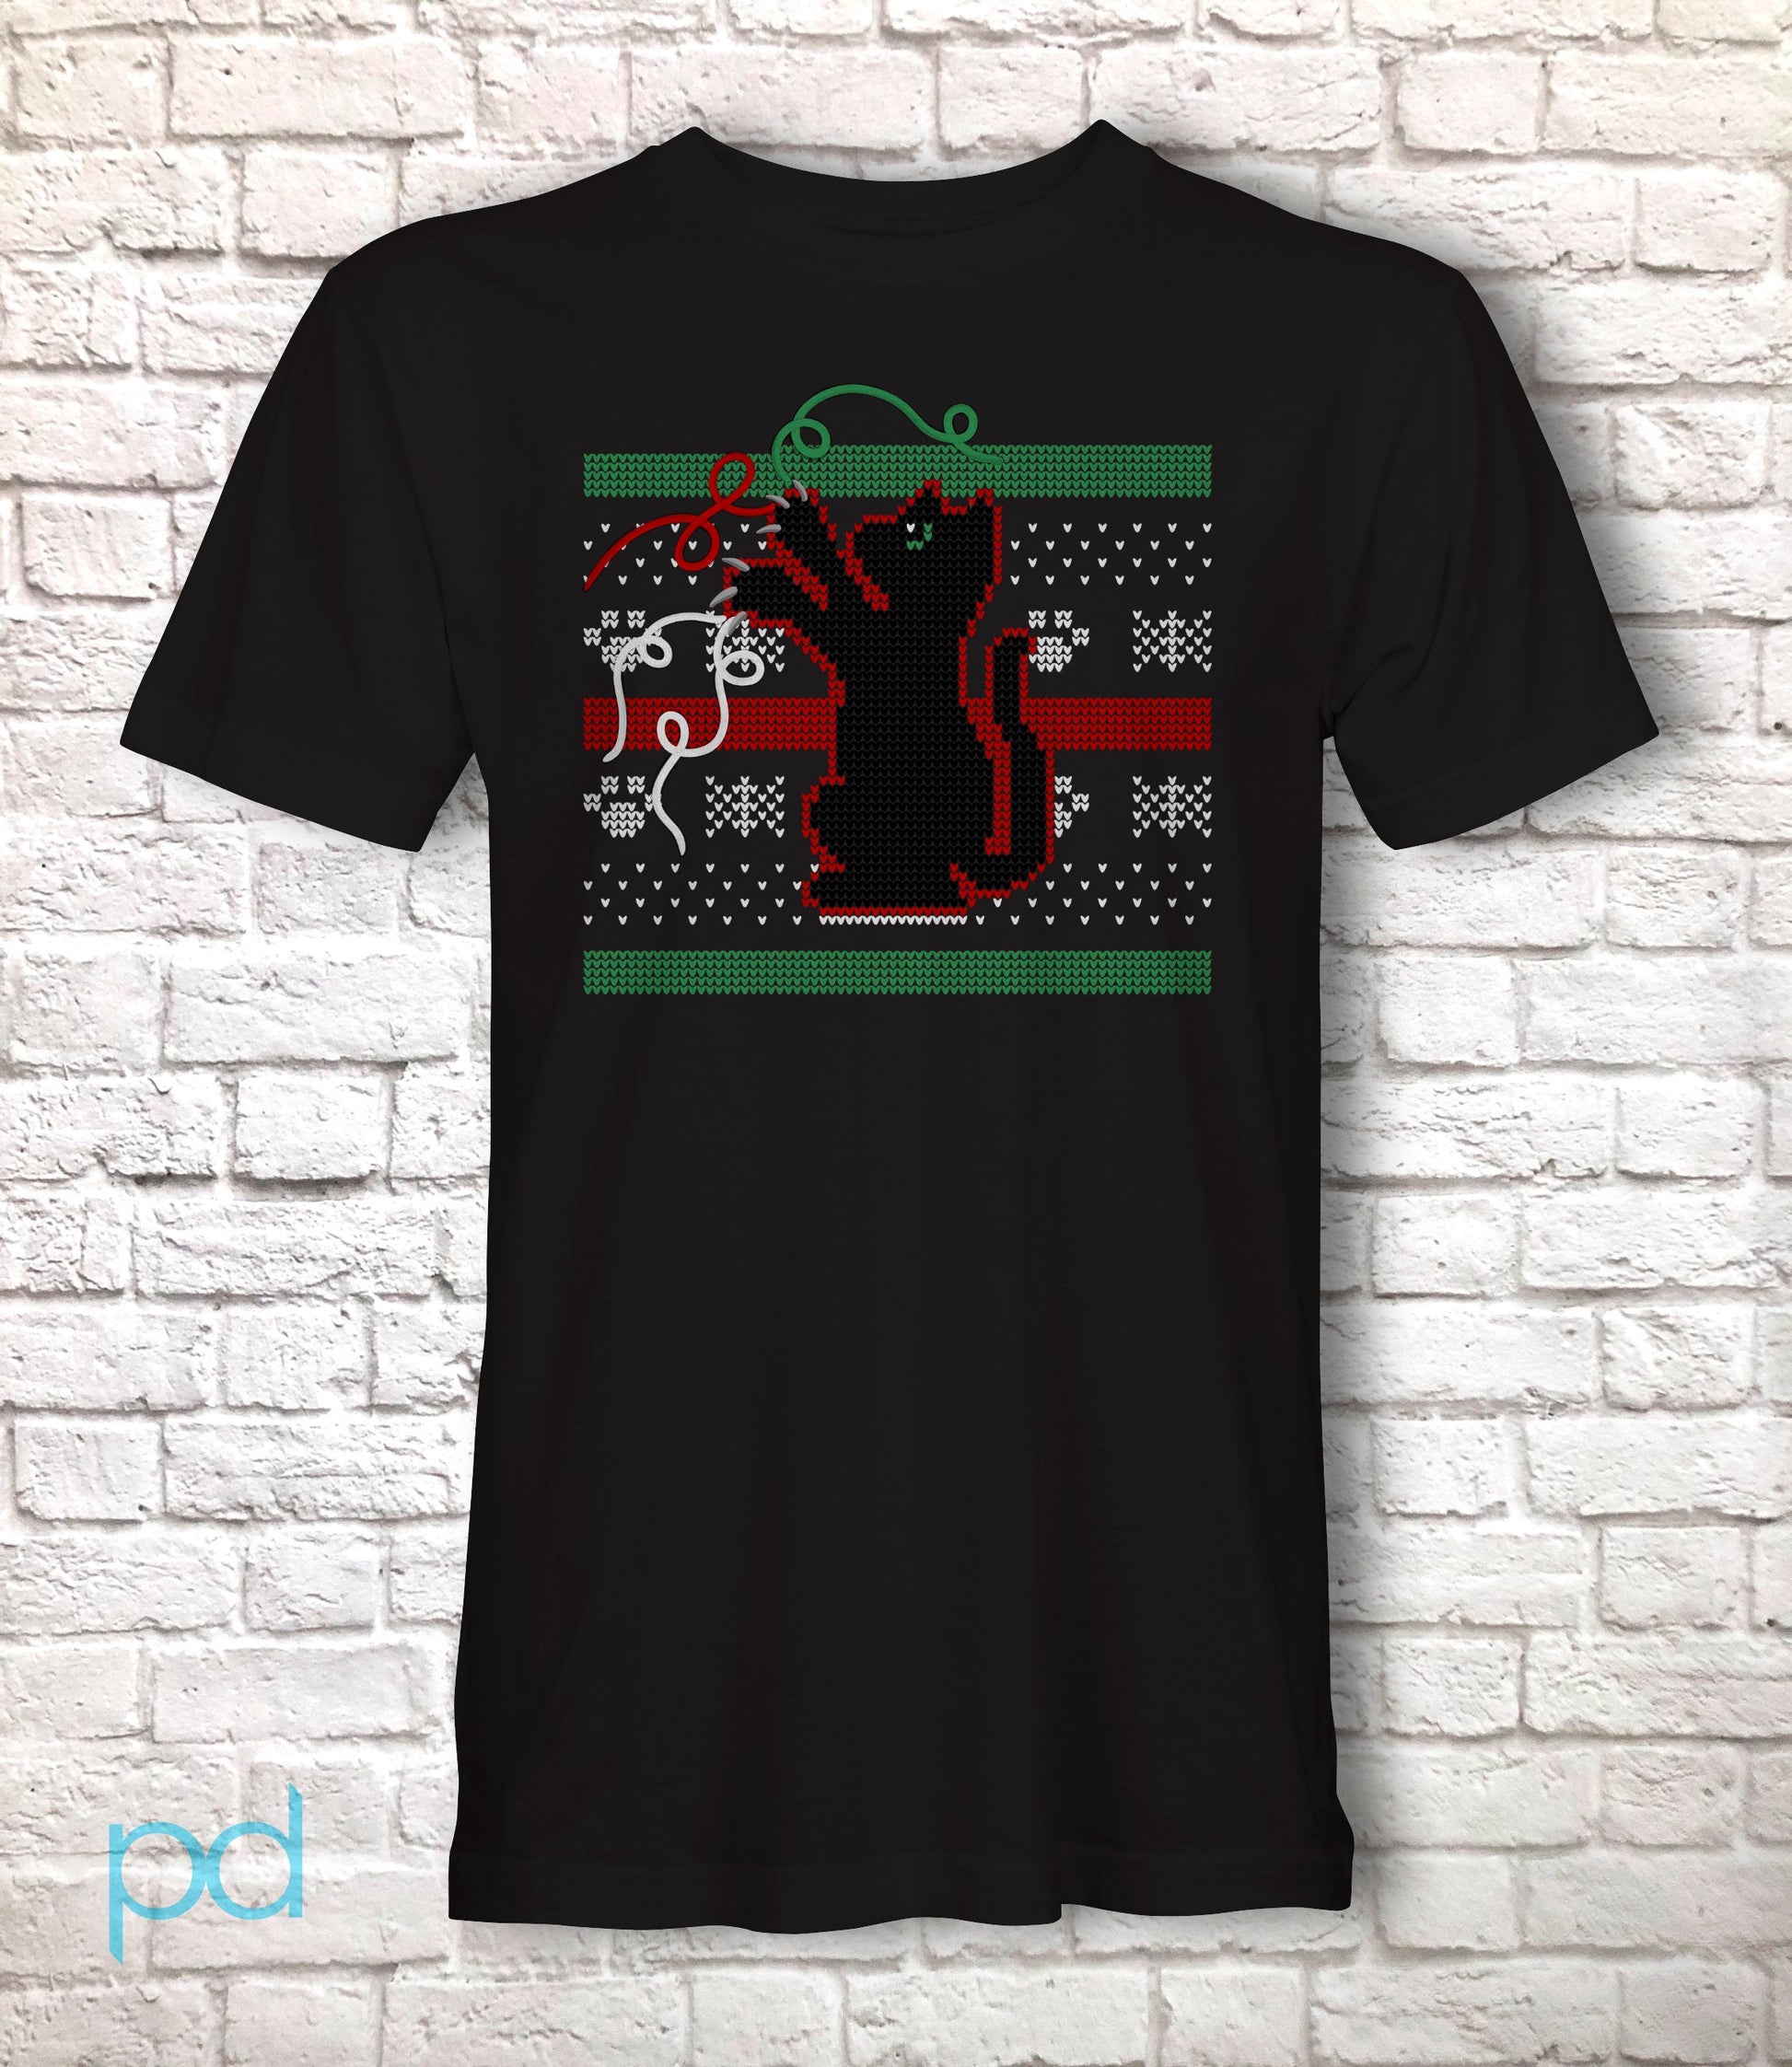 Cute Christmas Cat T-Shirt, Ugly Xmas Sweater Style Kitten Gift Idea, Black Cat Wool Thread & Stitches Graphic Tee Shirt Top